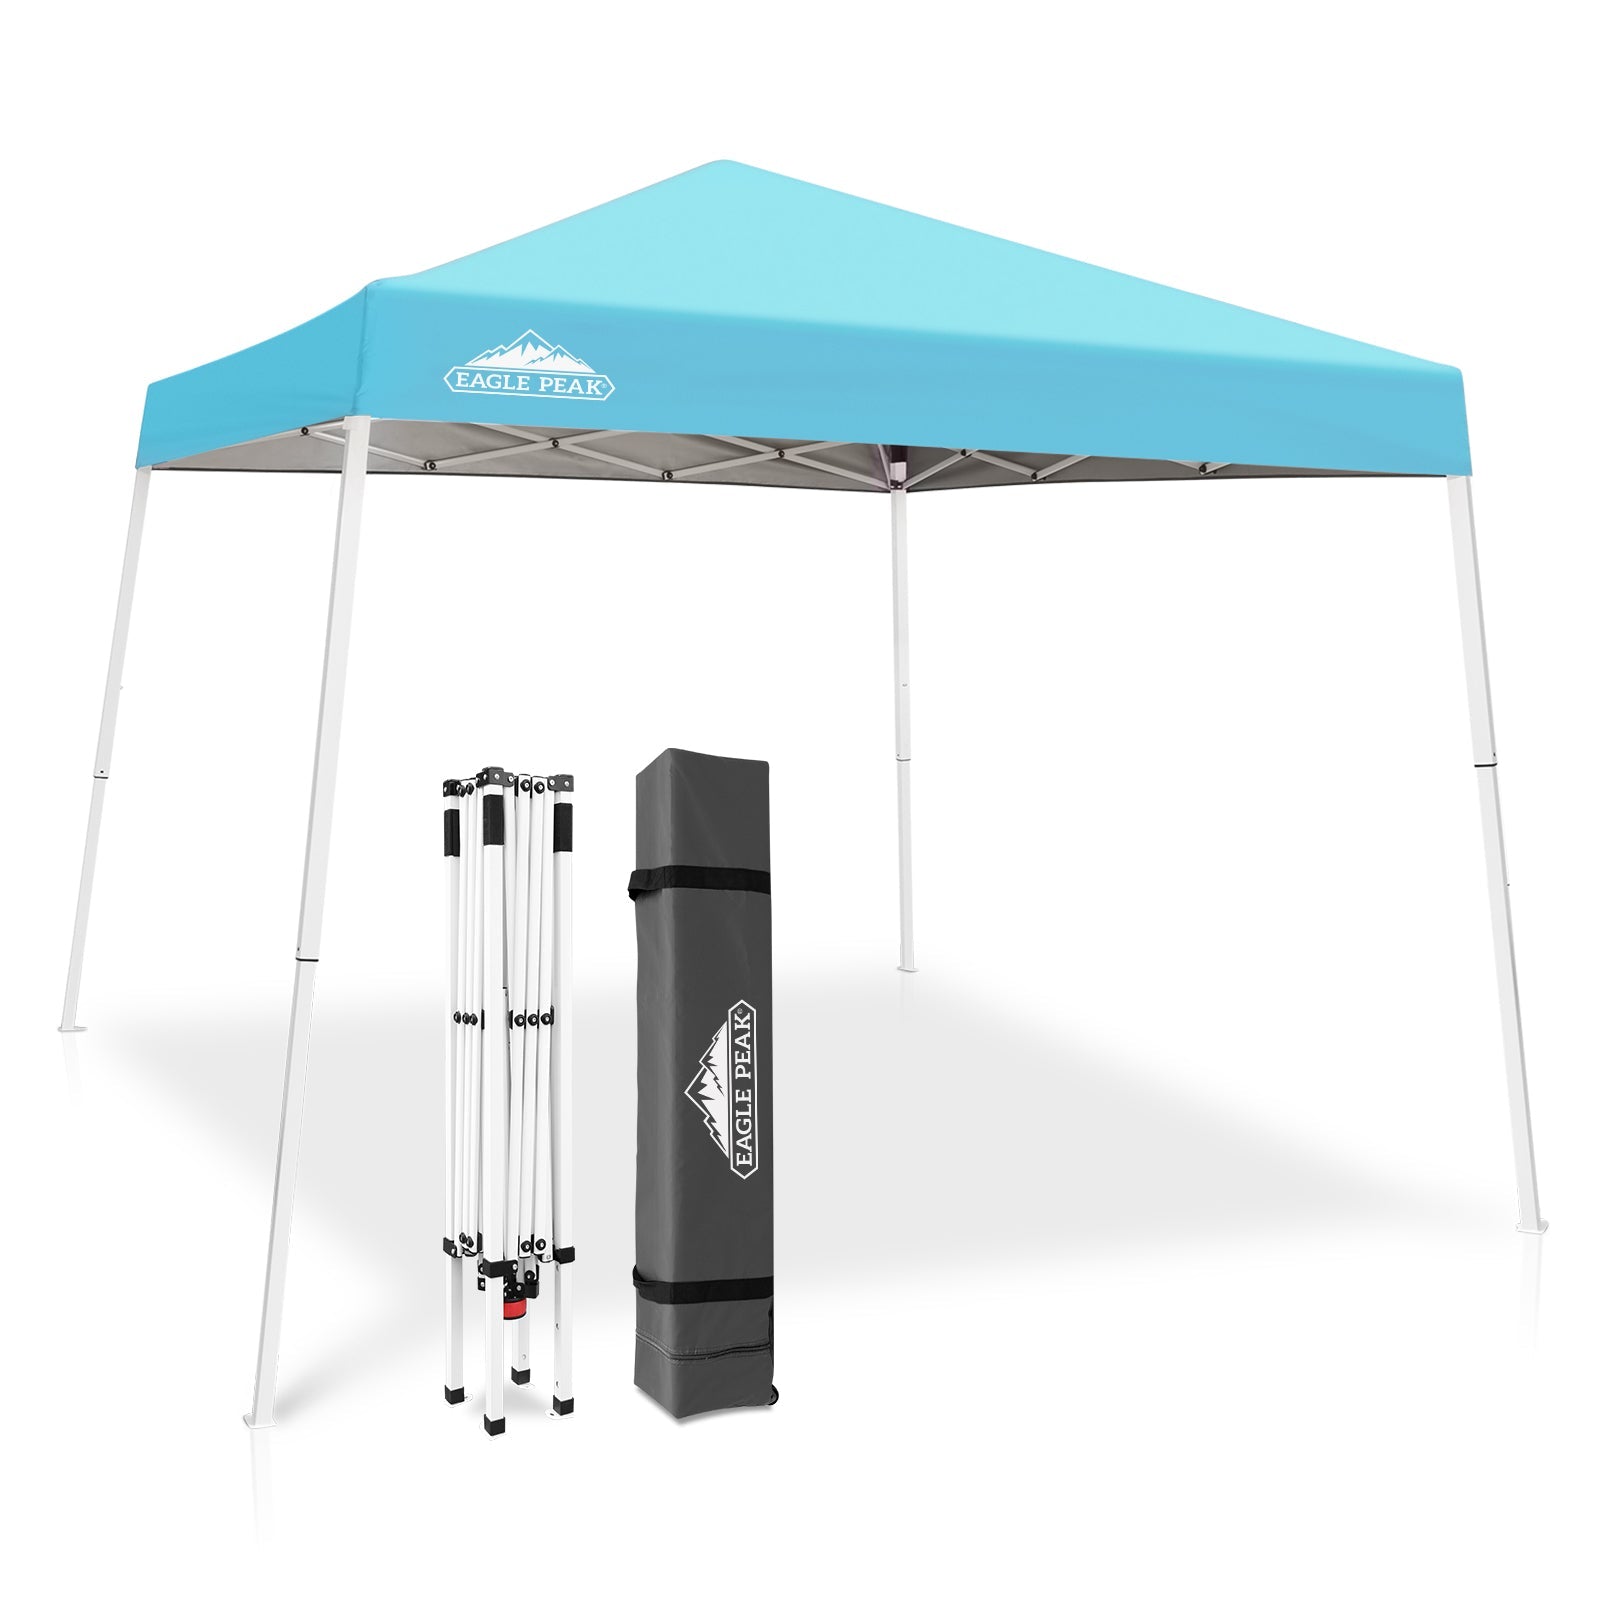 EAGLE PEAK 10' x 10' Slant Leg Pop-up Canopy Tent Easy One Person Setup Instant Outdoor Canopy Folding Shelter with 64 Square Feet of Shade (Light Blue)